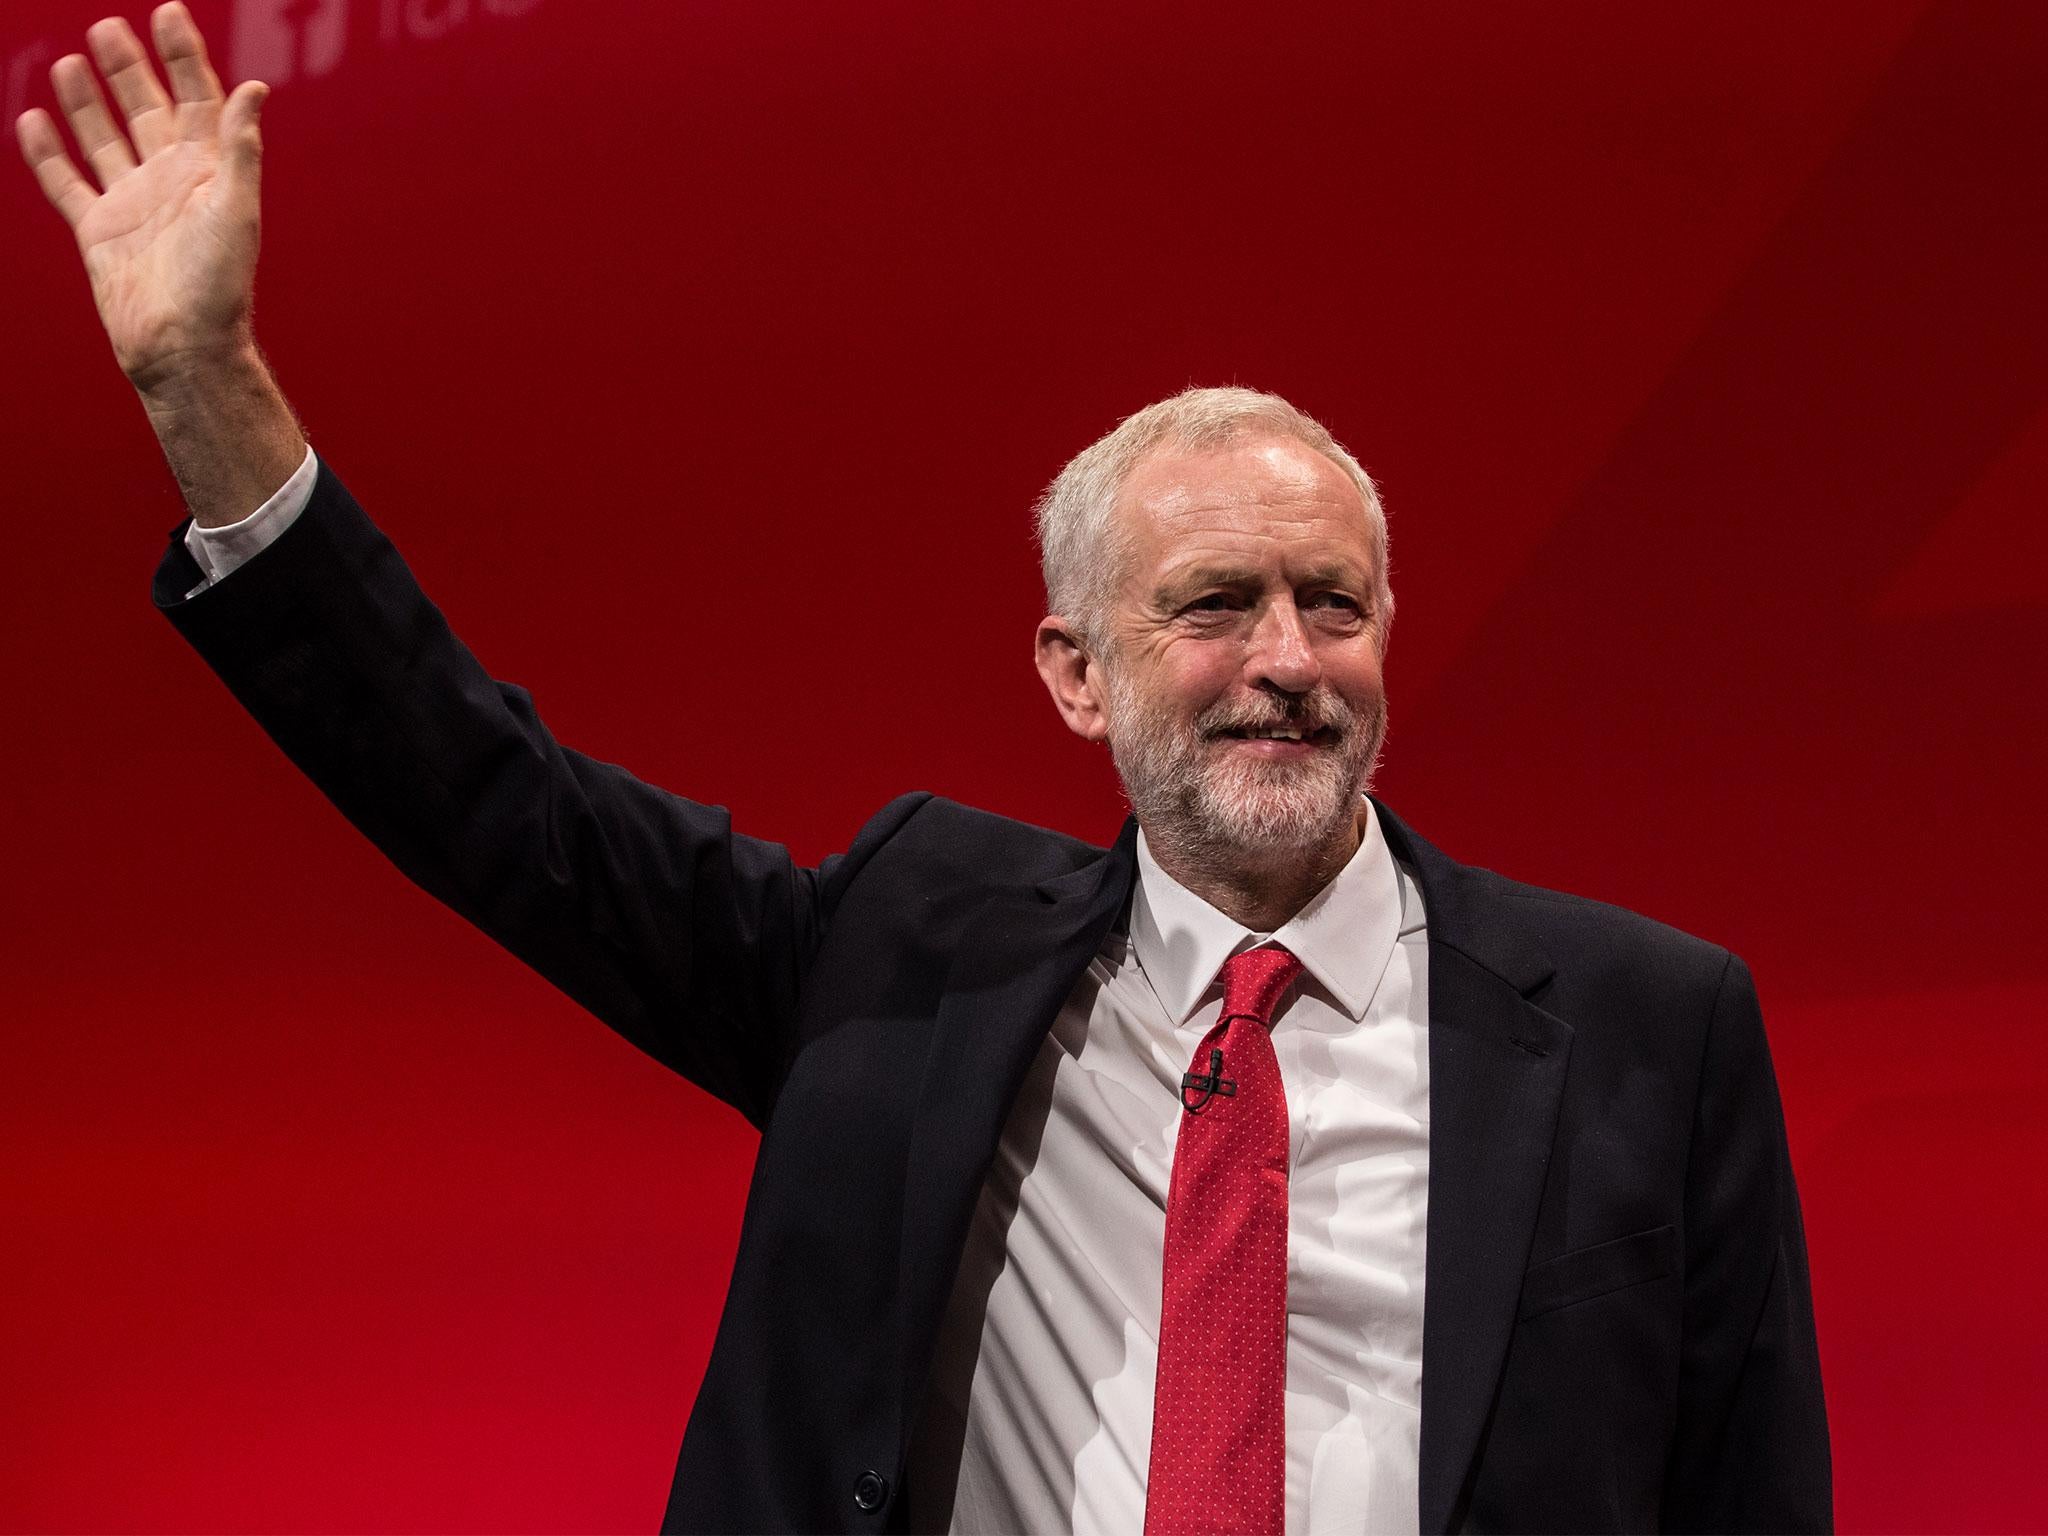 Jeremy Corbyn was a guest speaker at the Pink News awards ceremony